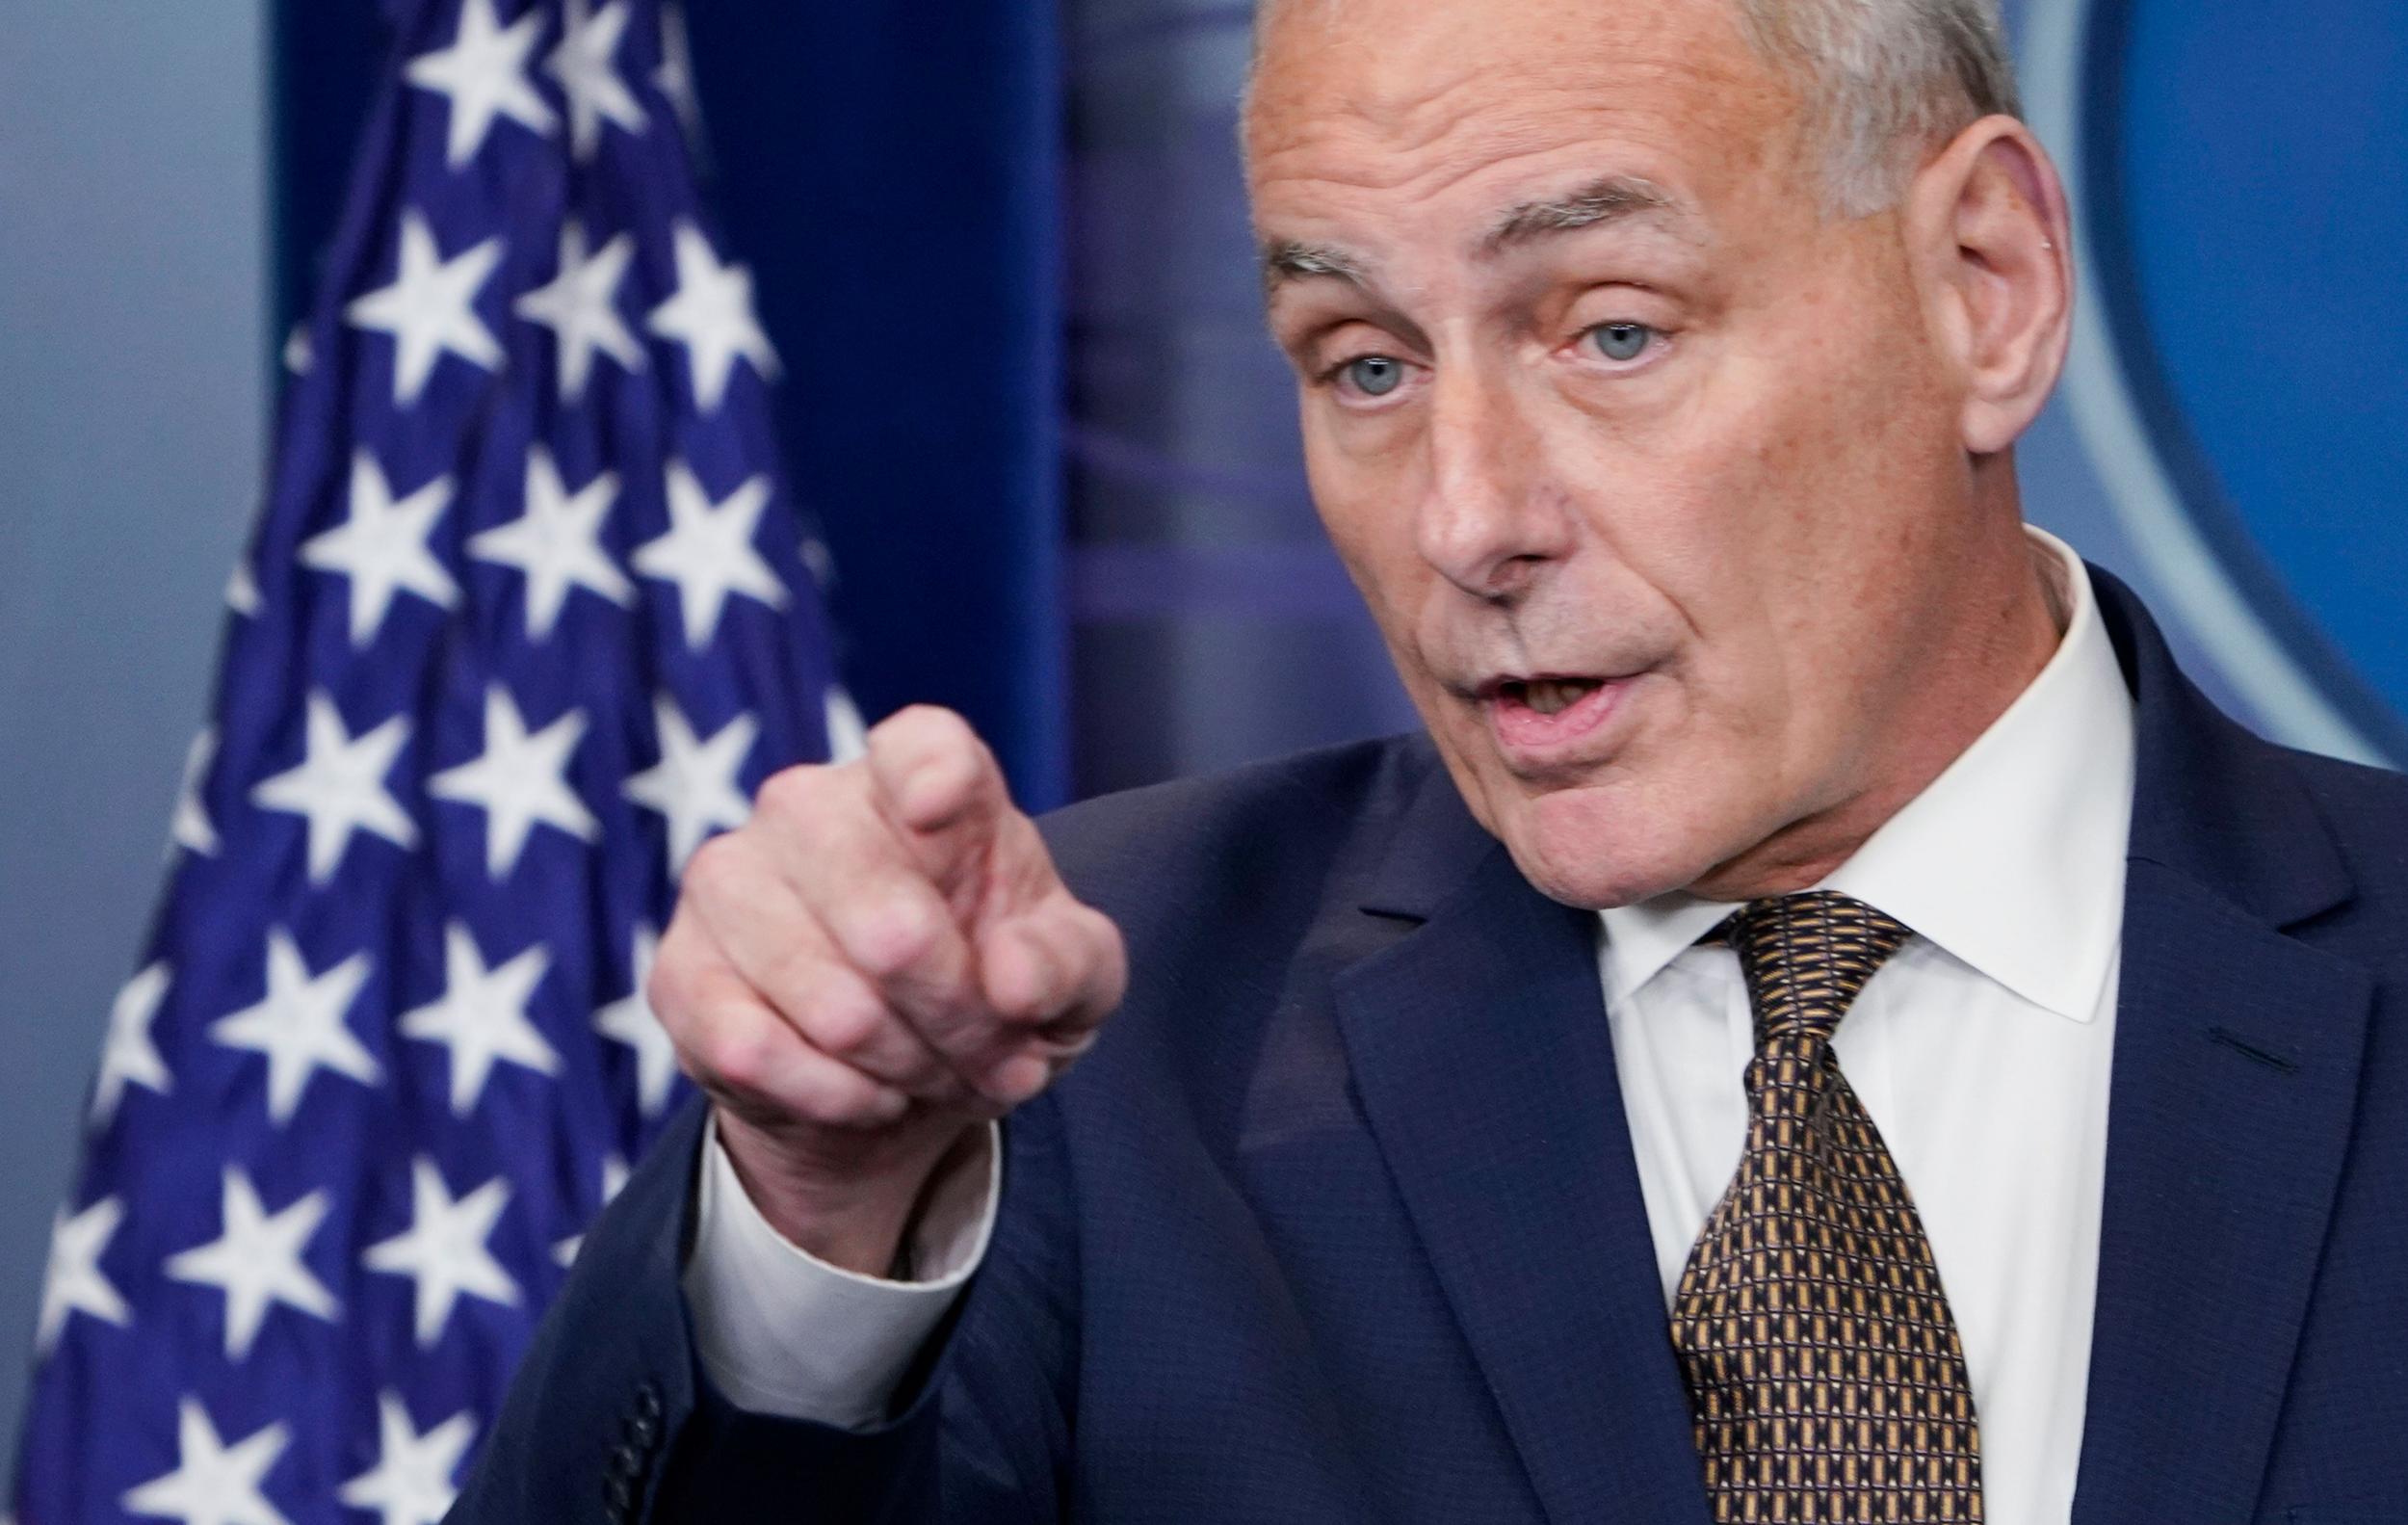 John Kelly says he has no plans to leave the White House just yet